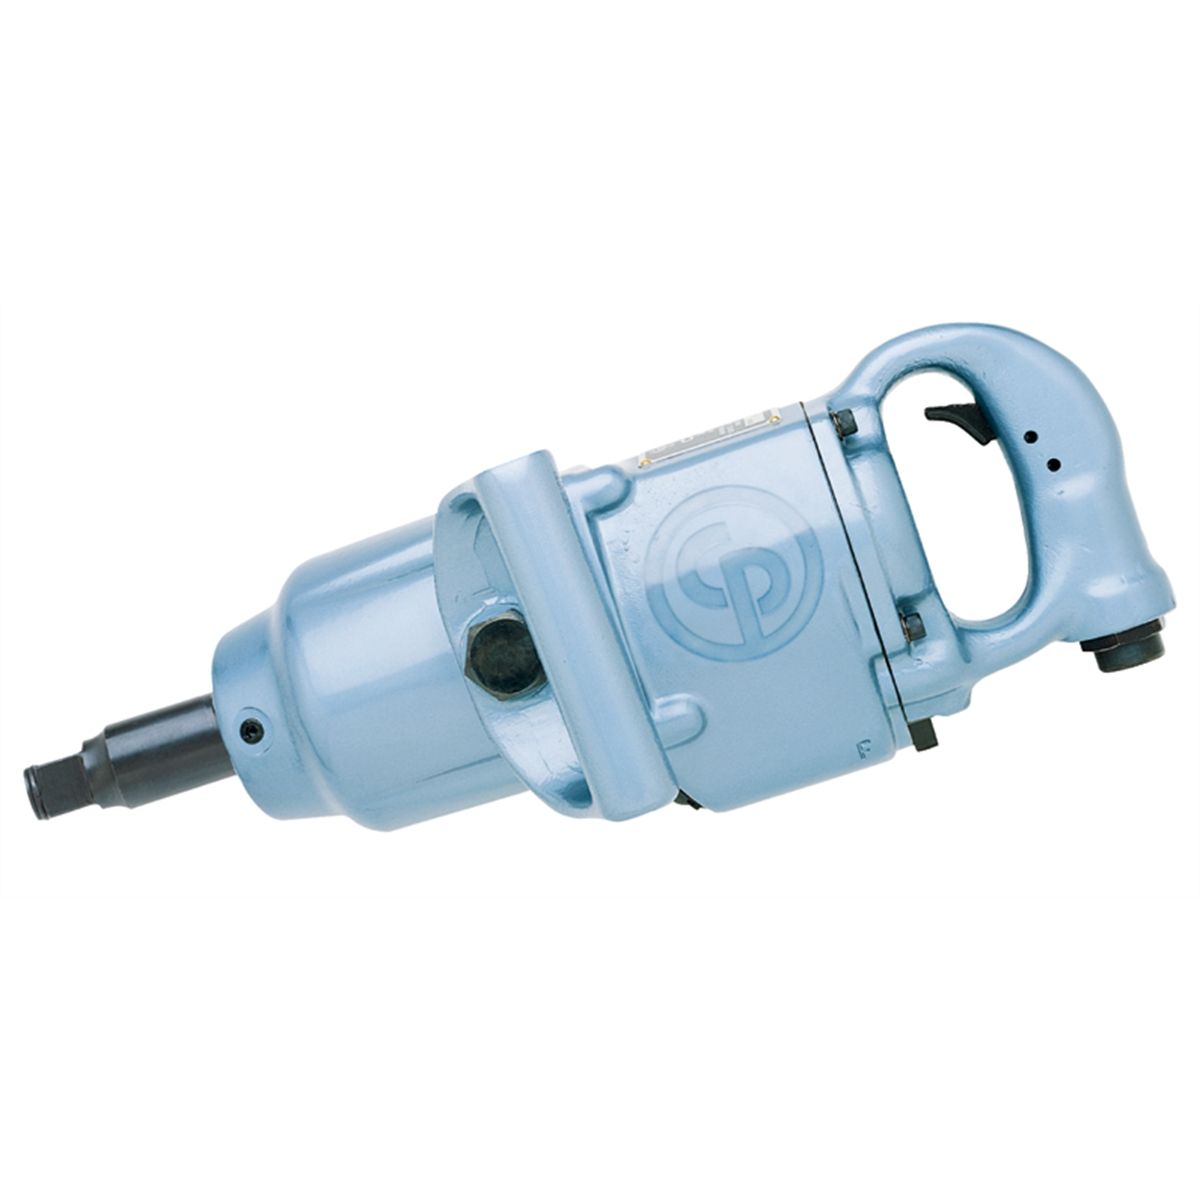 1" Inch Drive Heavy Duty Air Impact Wrench CP797